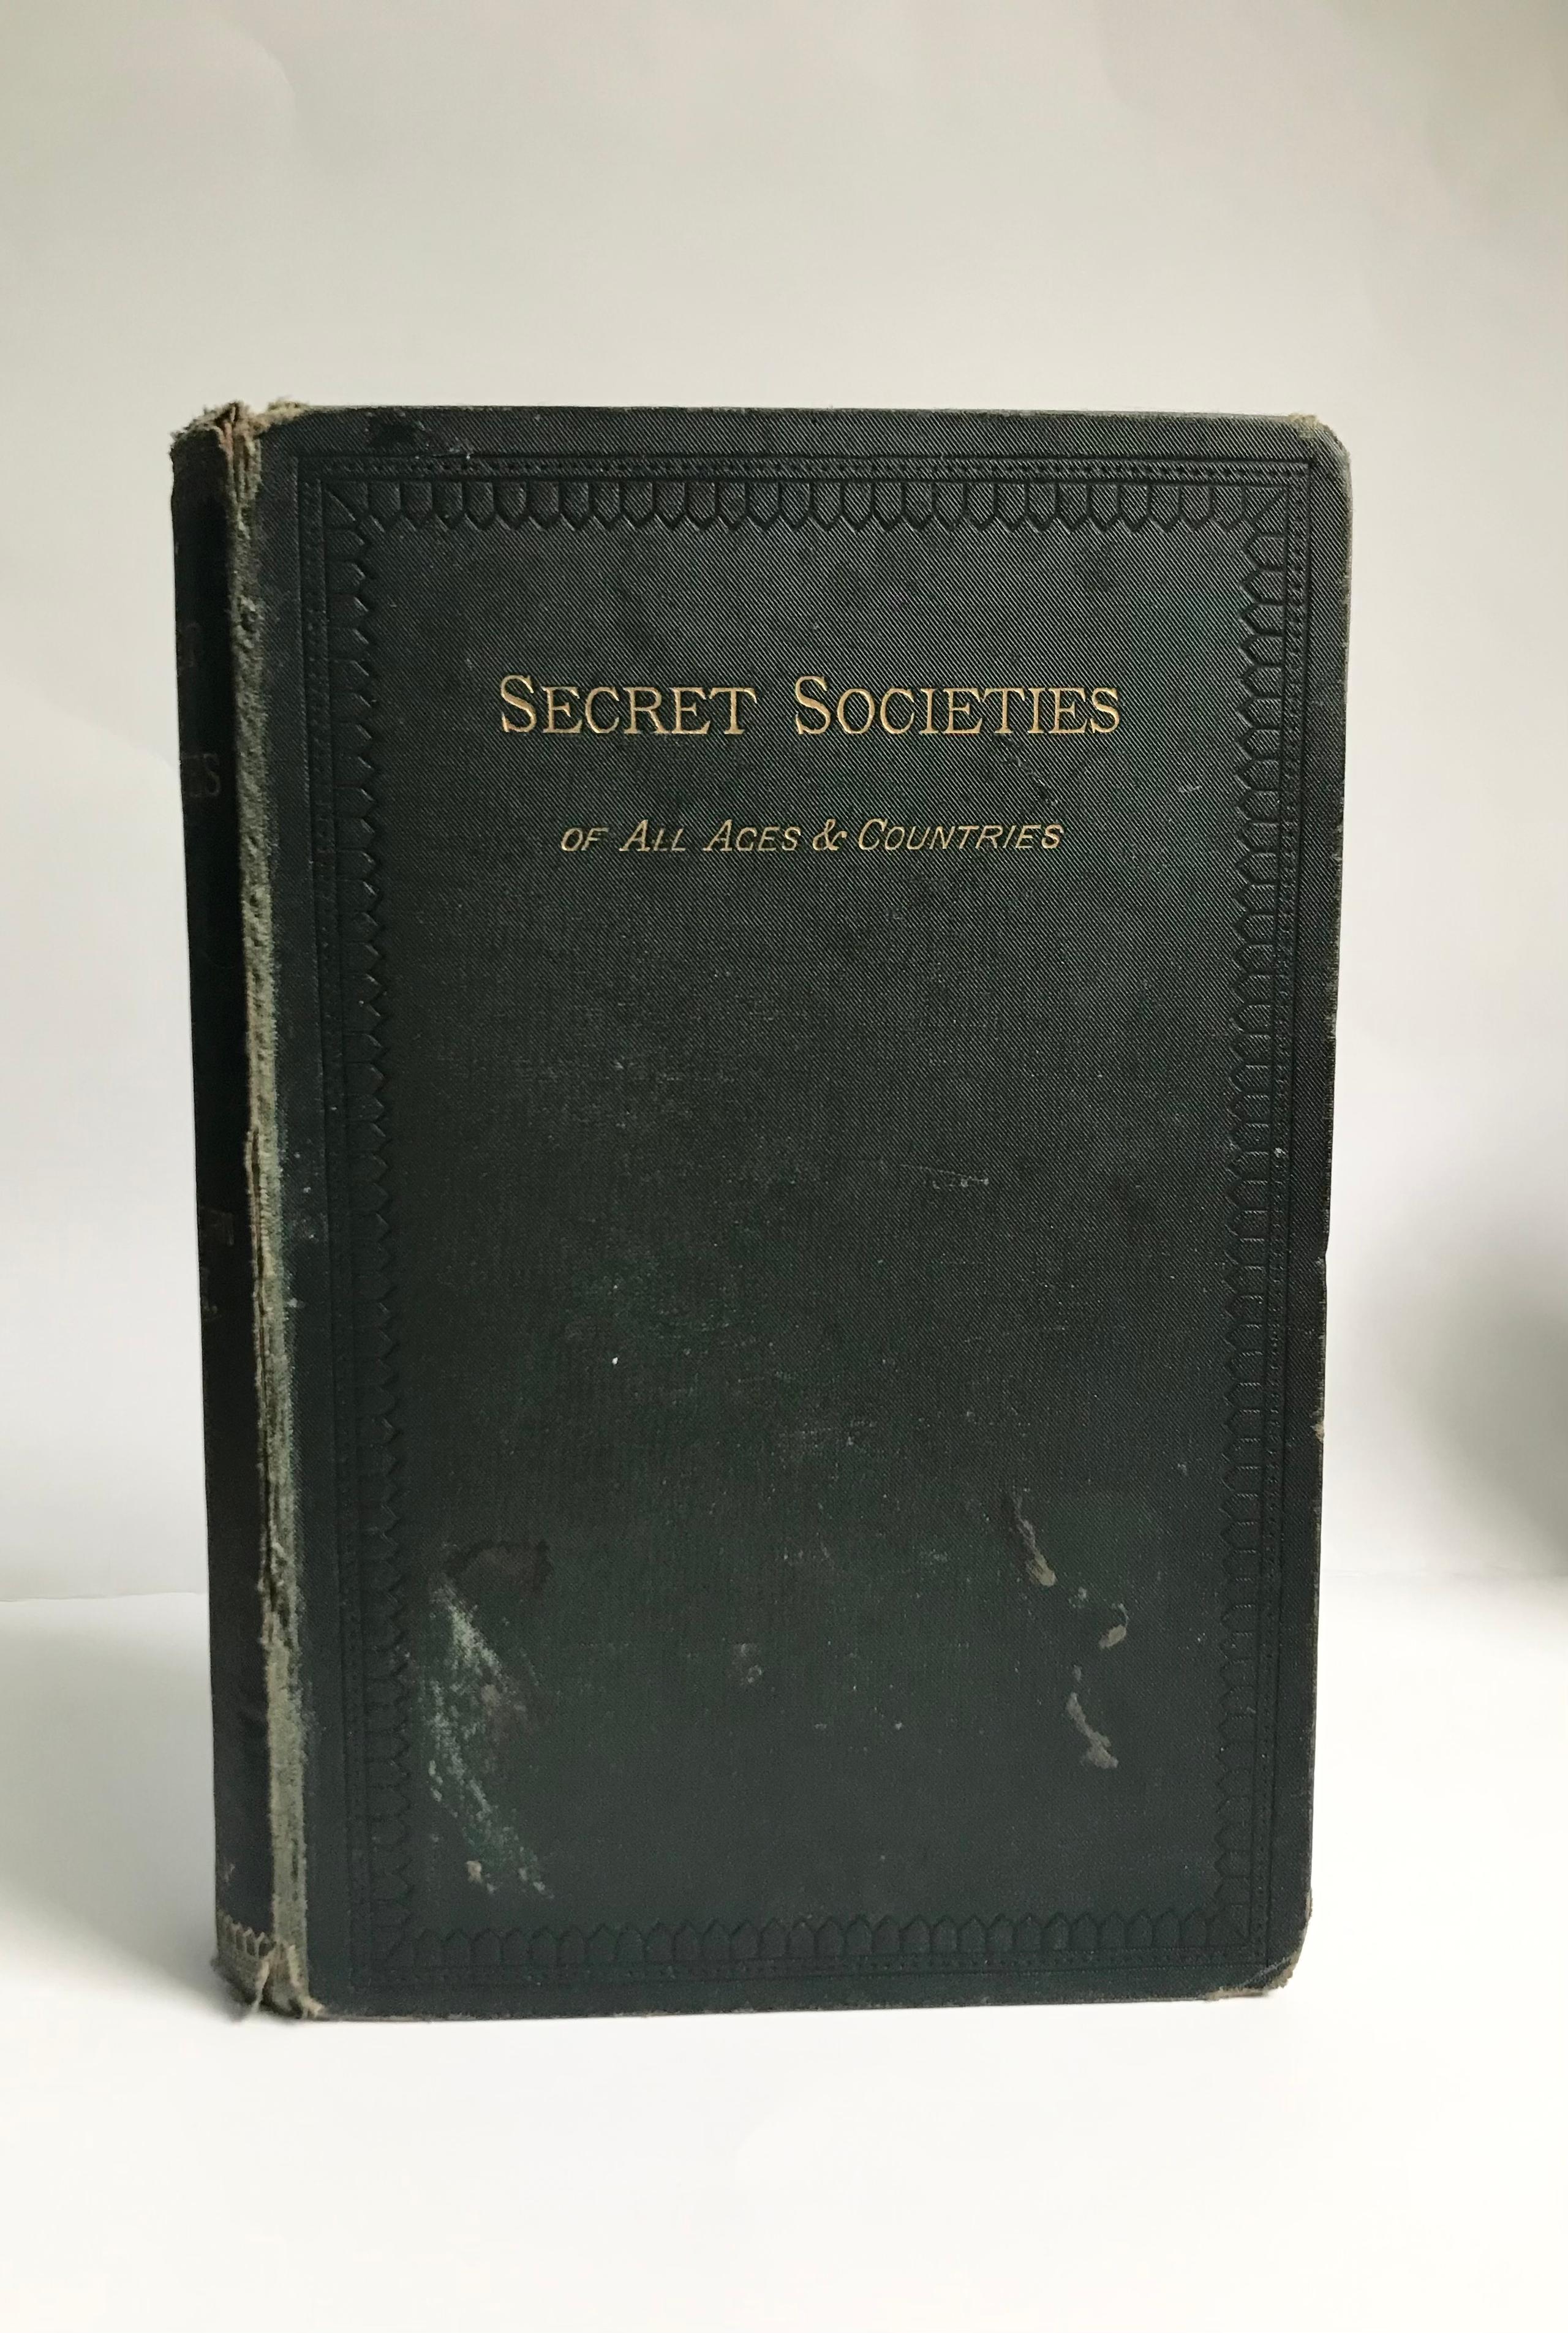 The Secret Societies of All Ages and Countries by Charles William Heckethorn